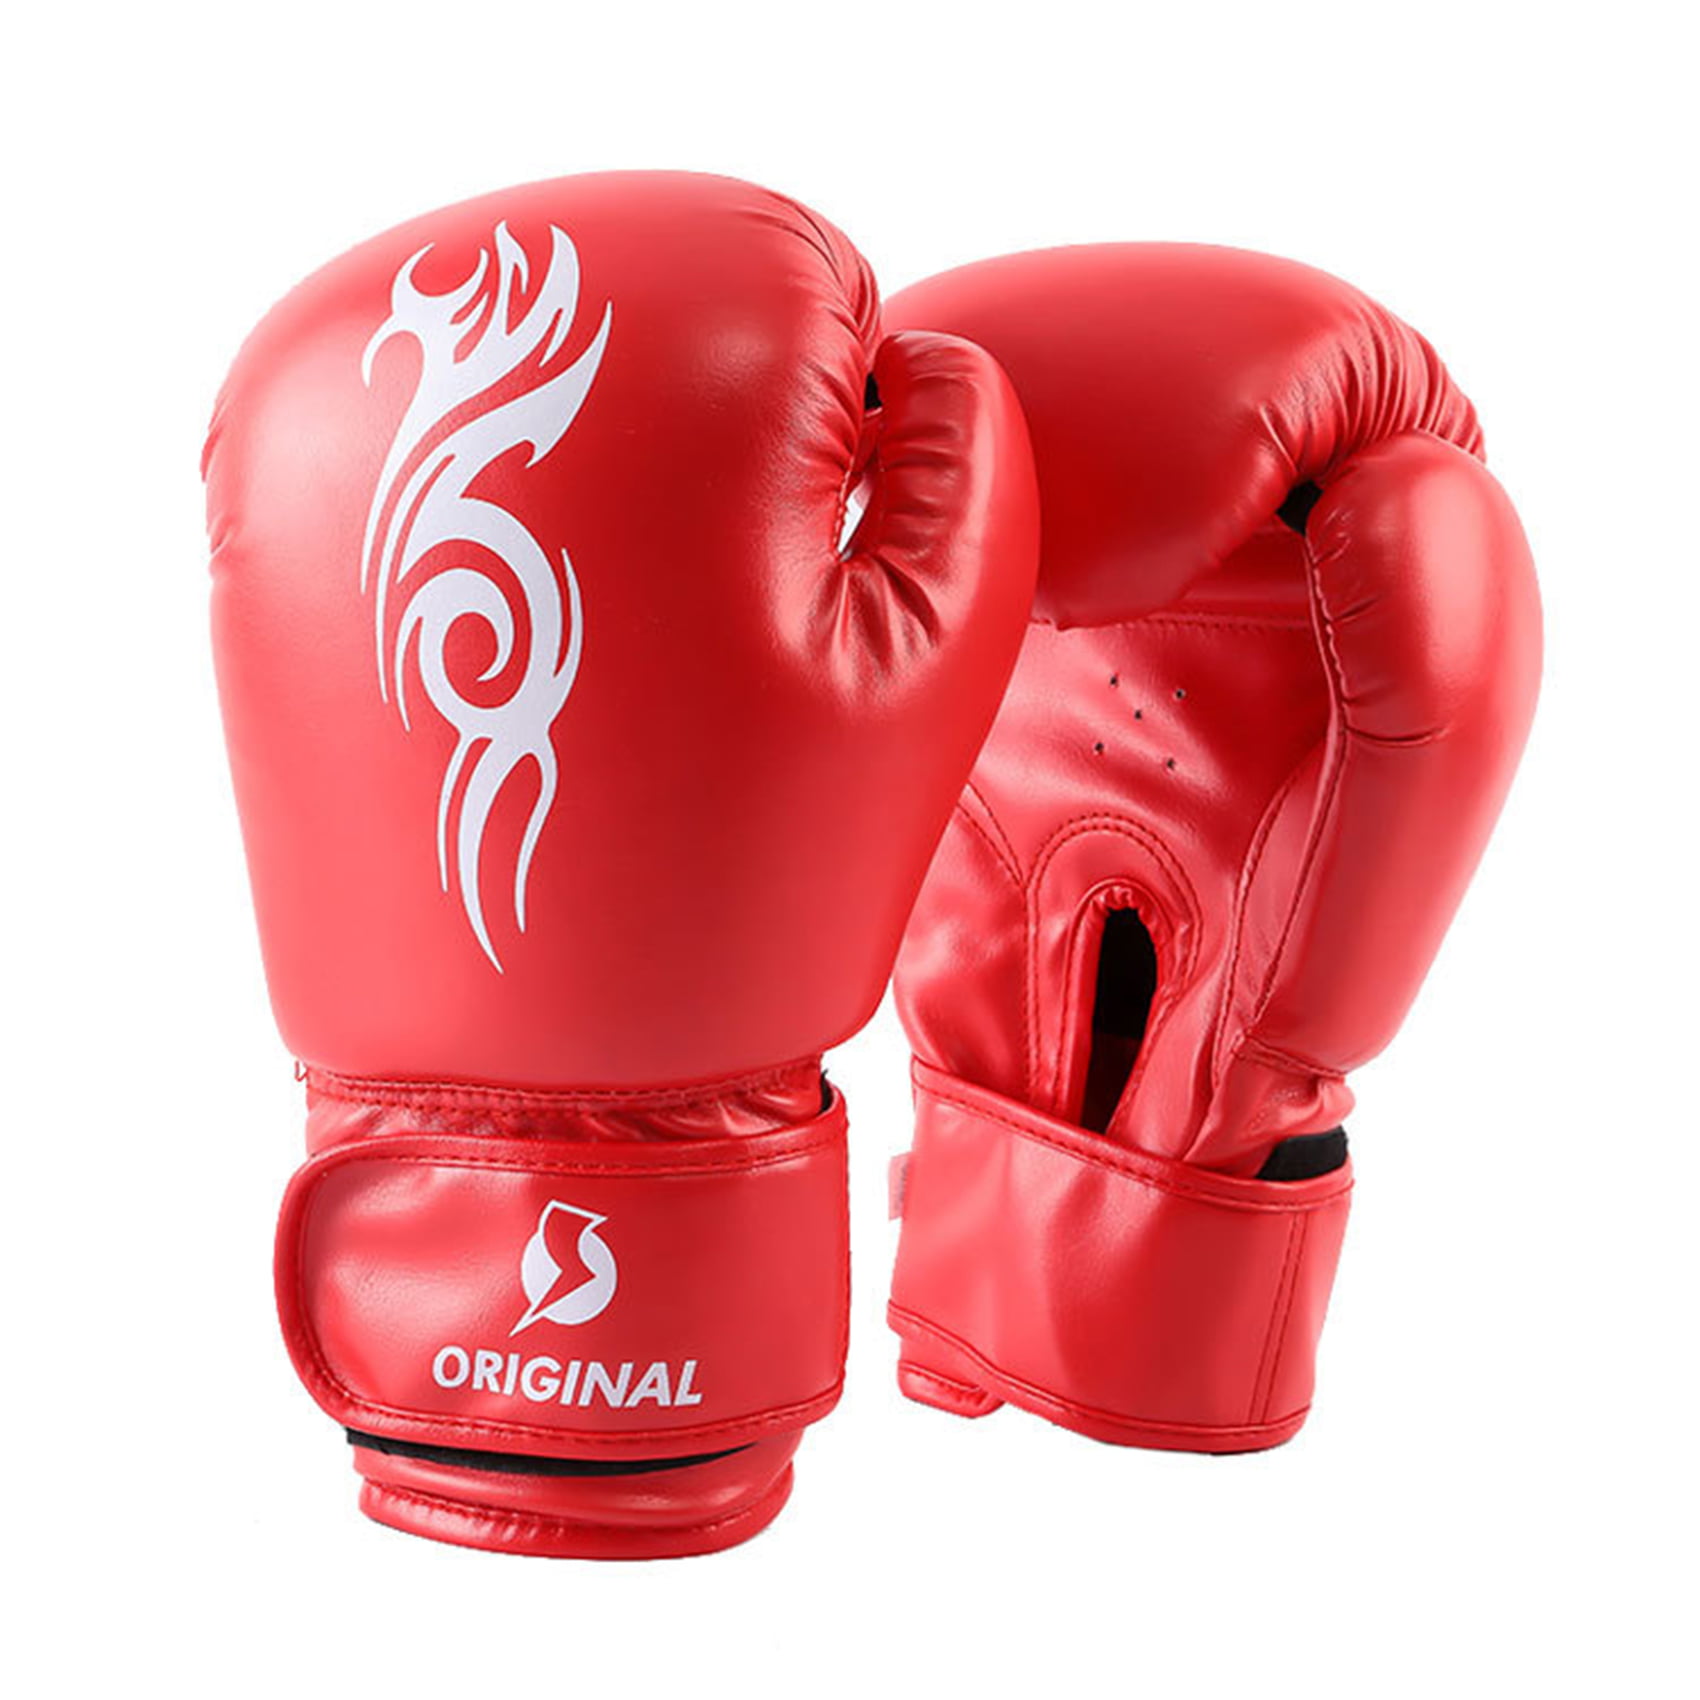 Details about   Fighting Boxing Gloves Fight Mma Men Sports Tiger Muay Thai Sanda Pads Black Box 